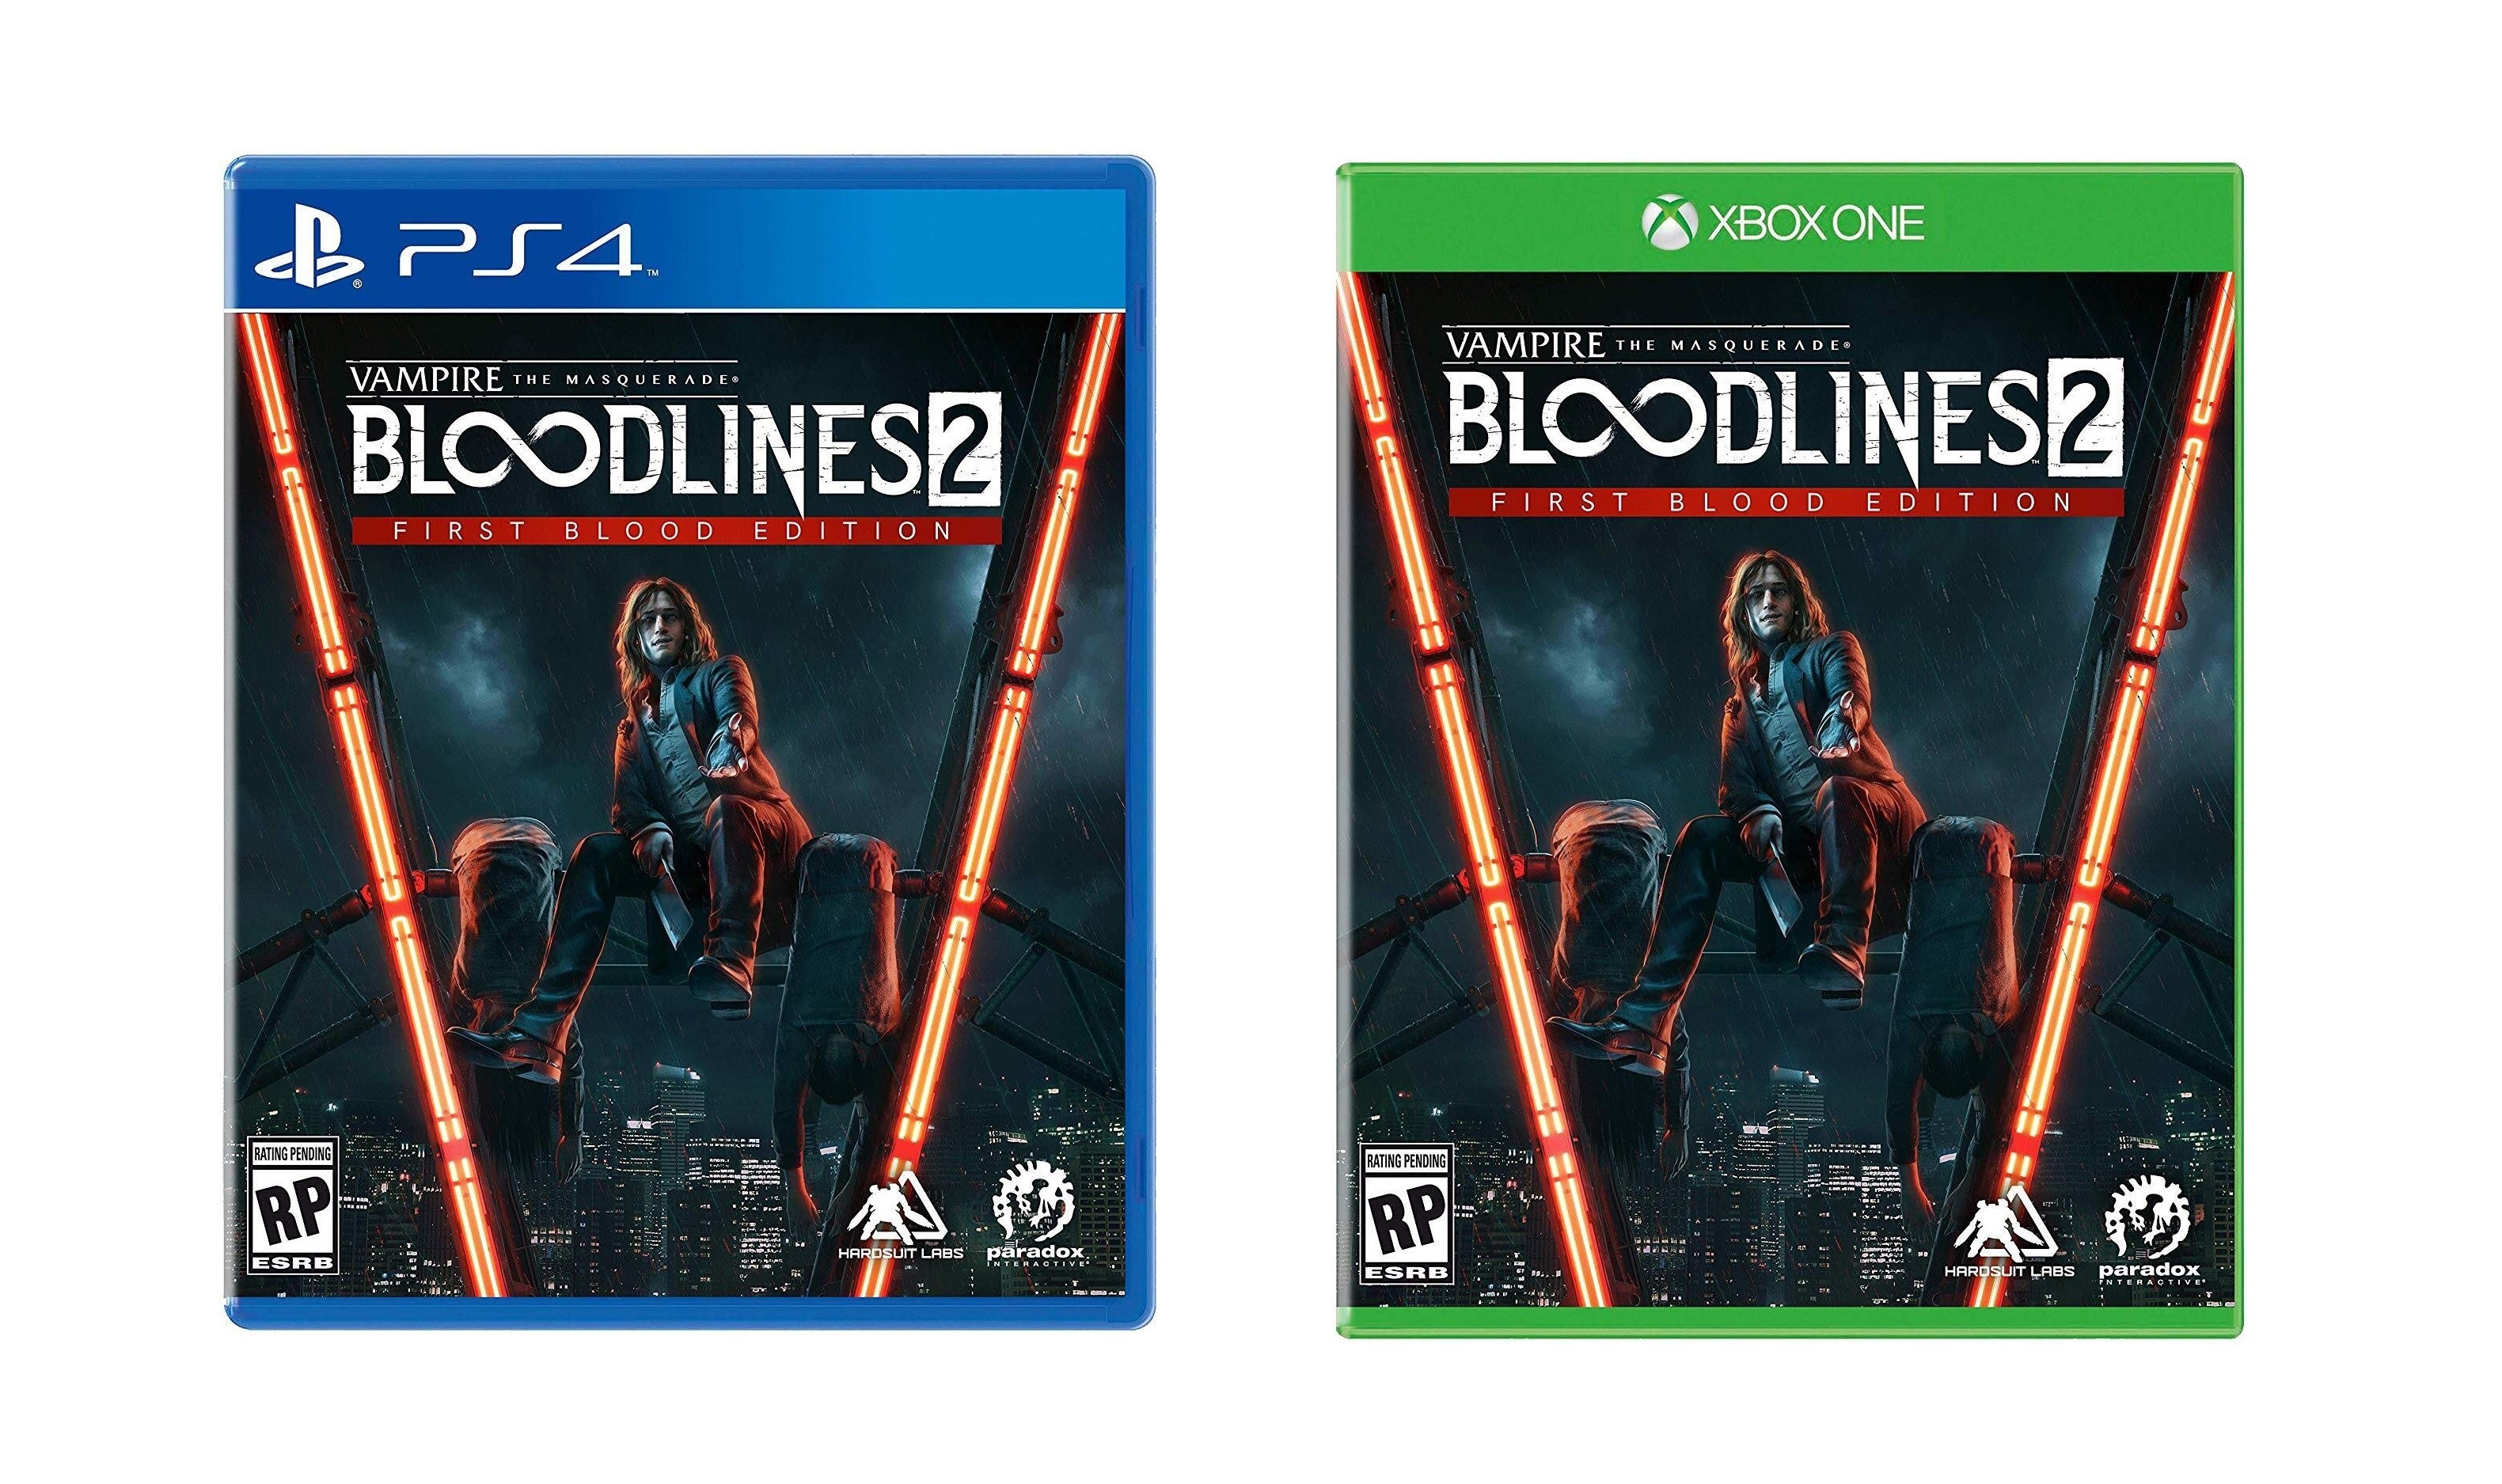 Vampire: The Masquerade - Bloodlines 2 Pre-Order Guide: Release